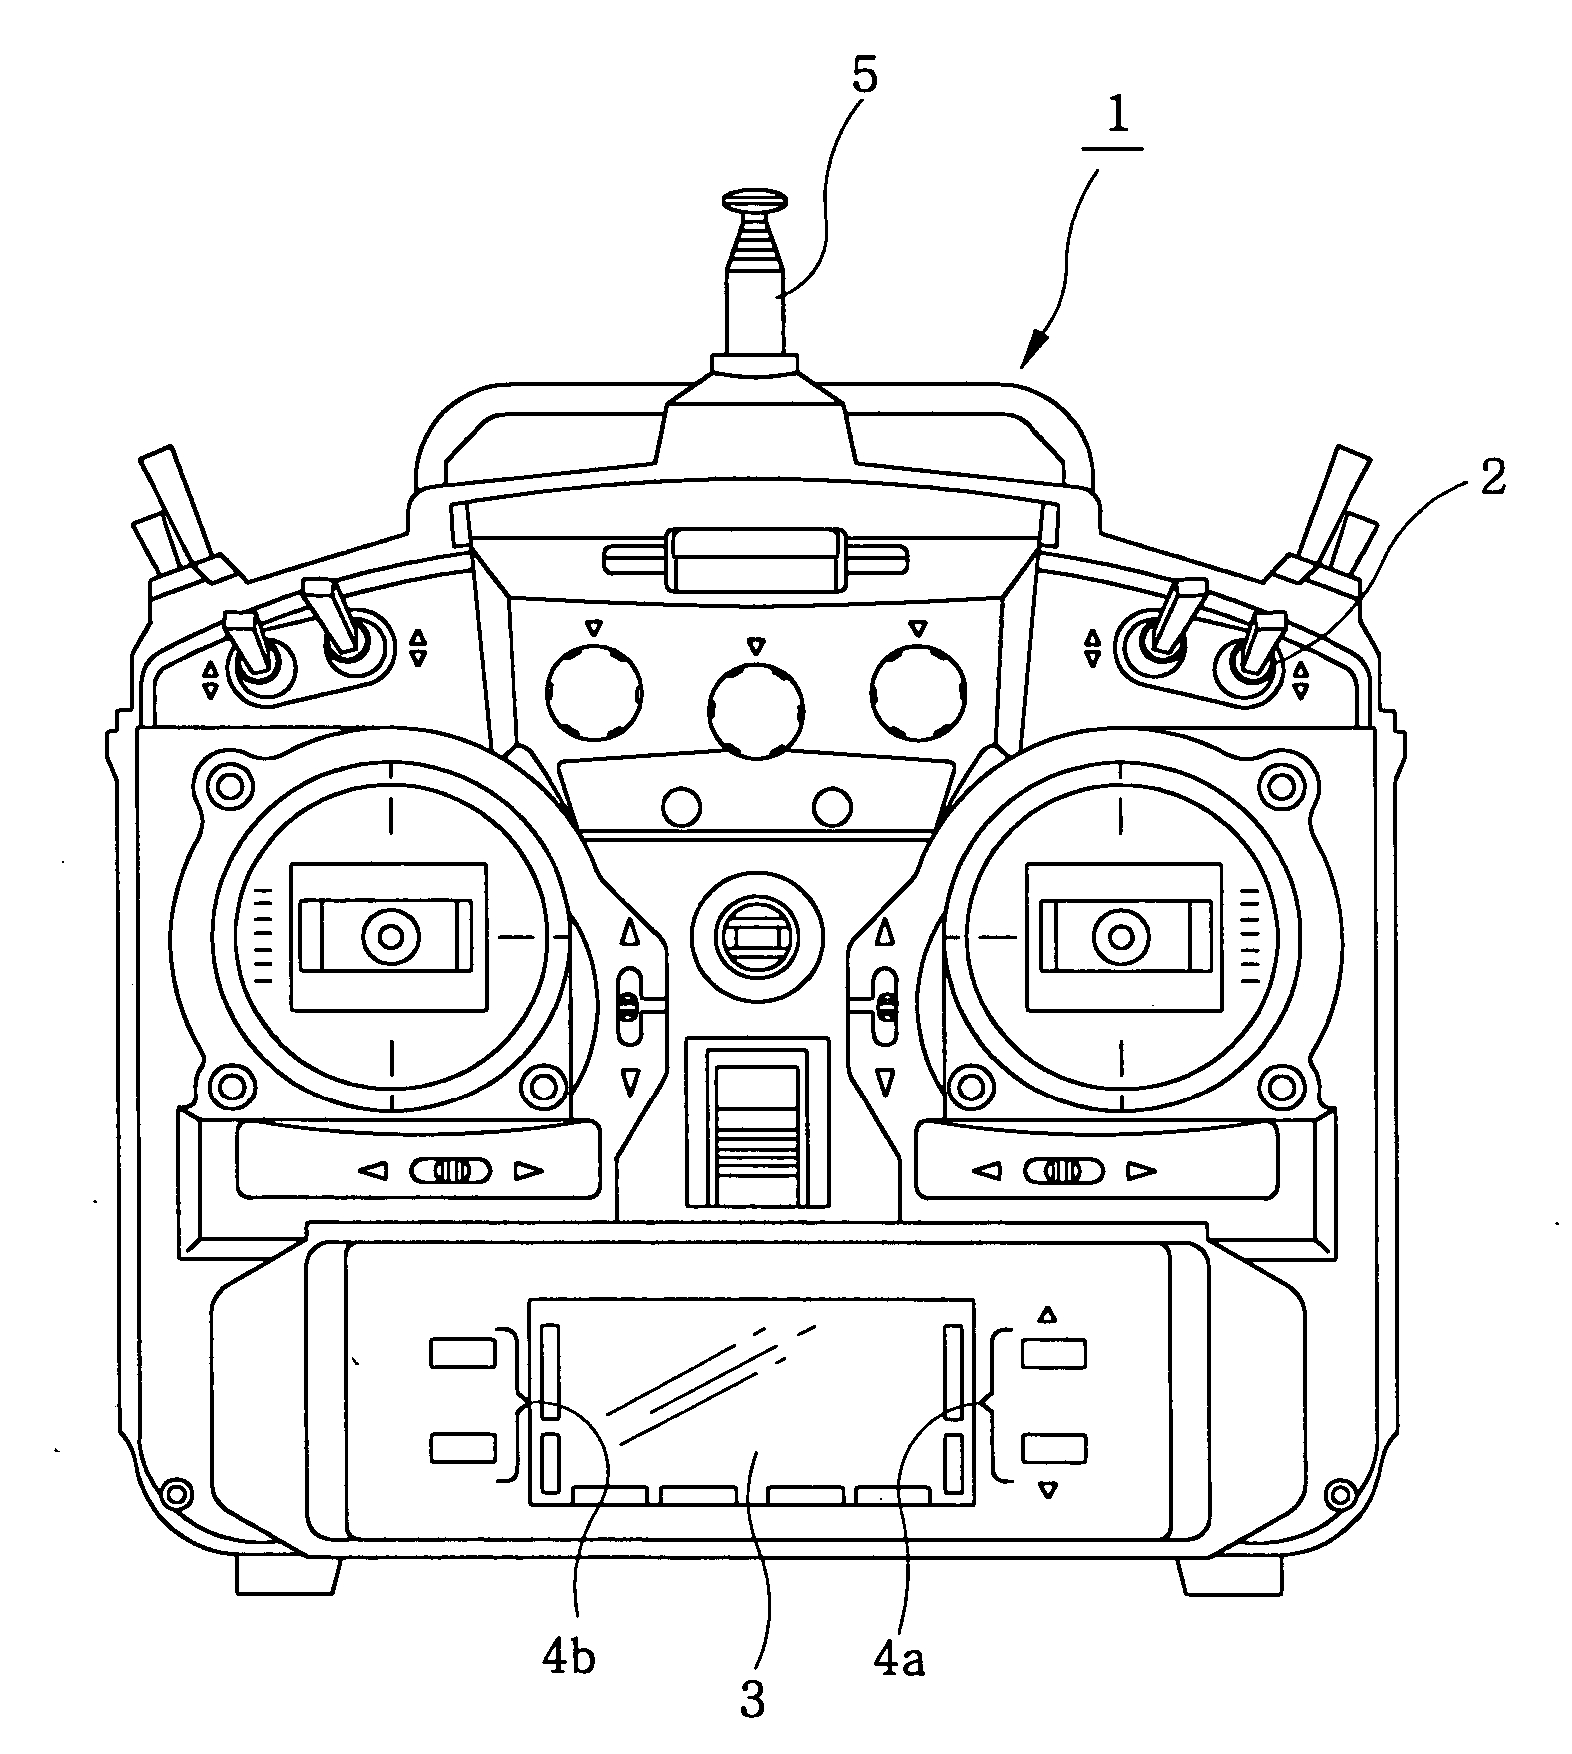 Radio remote control unit with a playback function